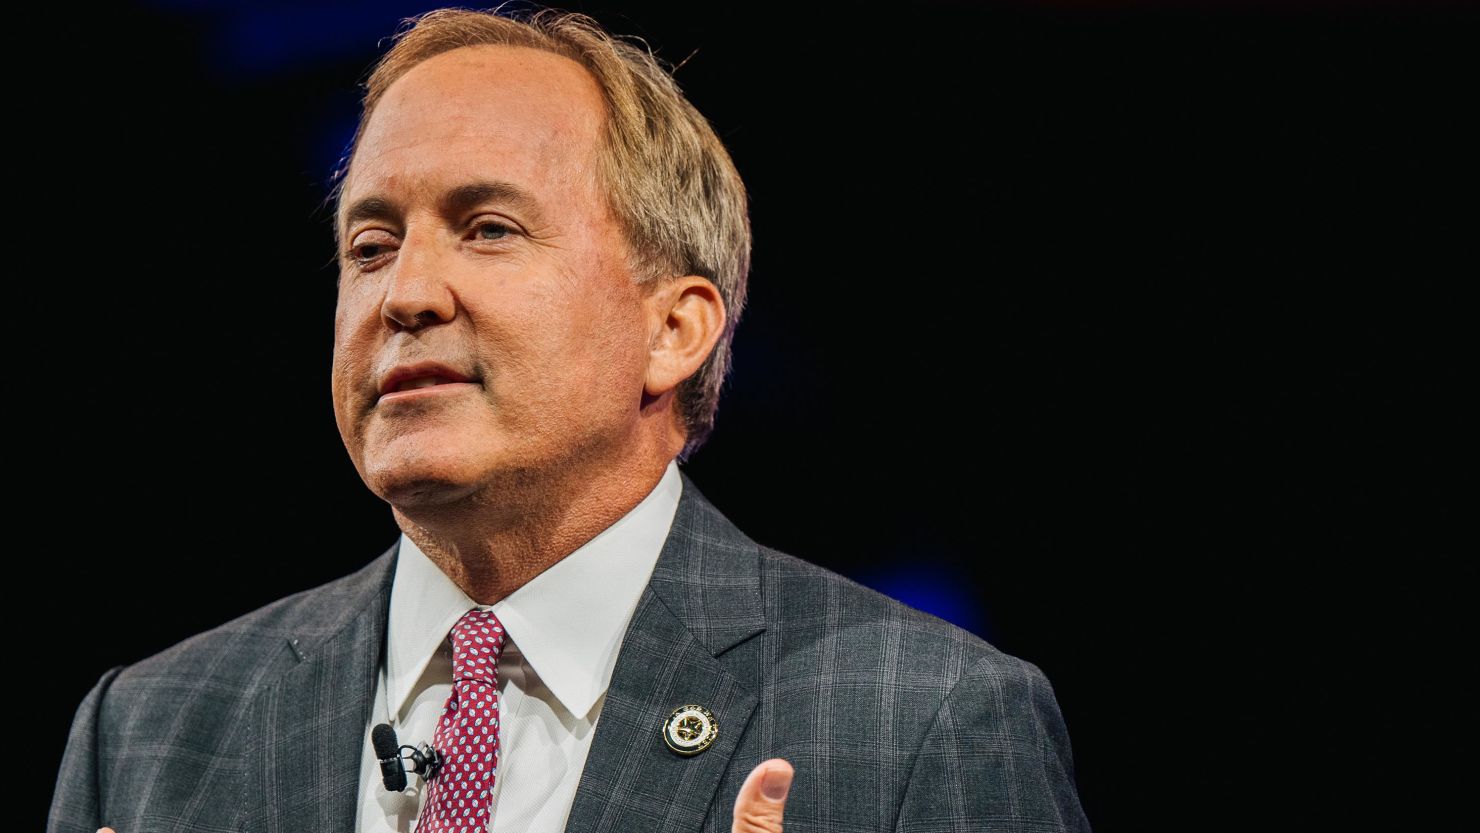 Texas Attorney General Ken Paxton speaks during the Conservative Political Action Conference on July 11, 2021, in Dallas.